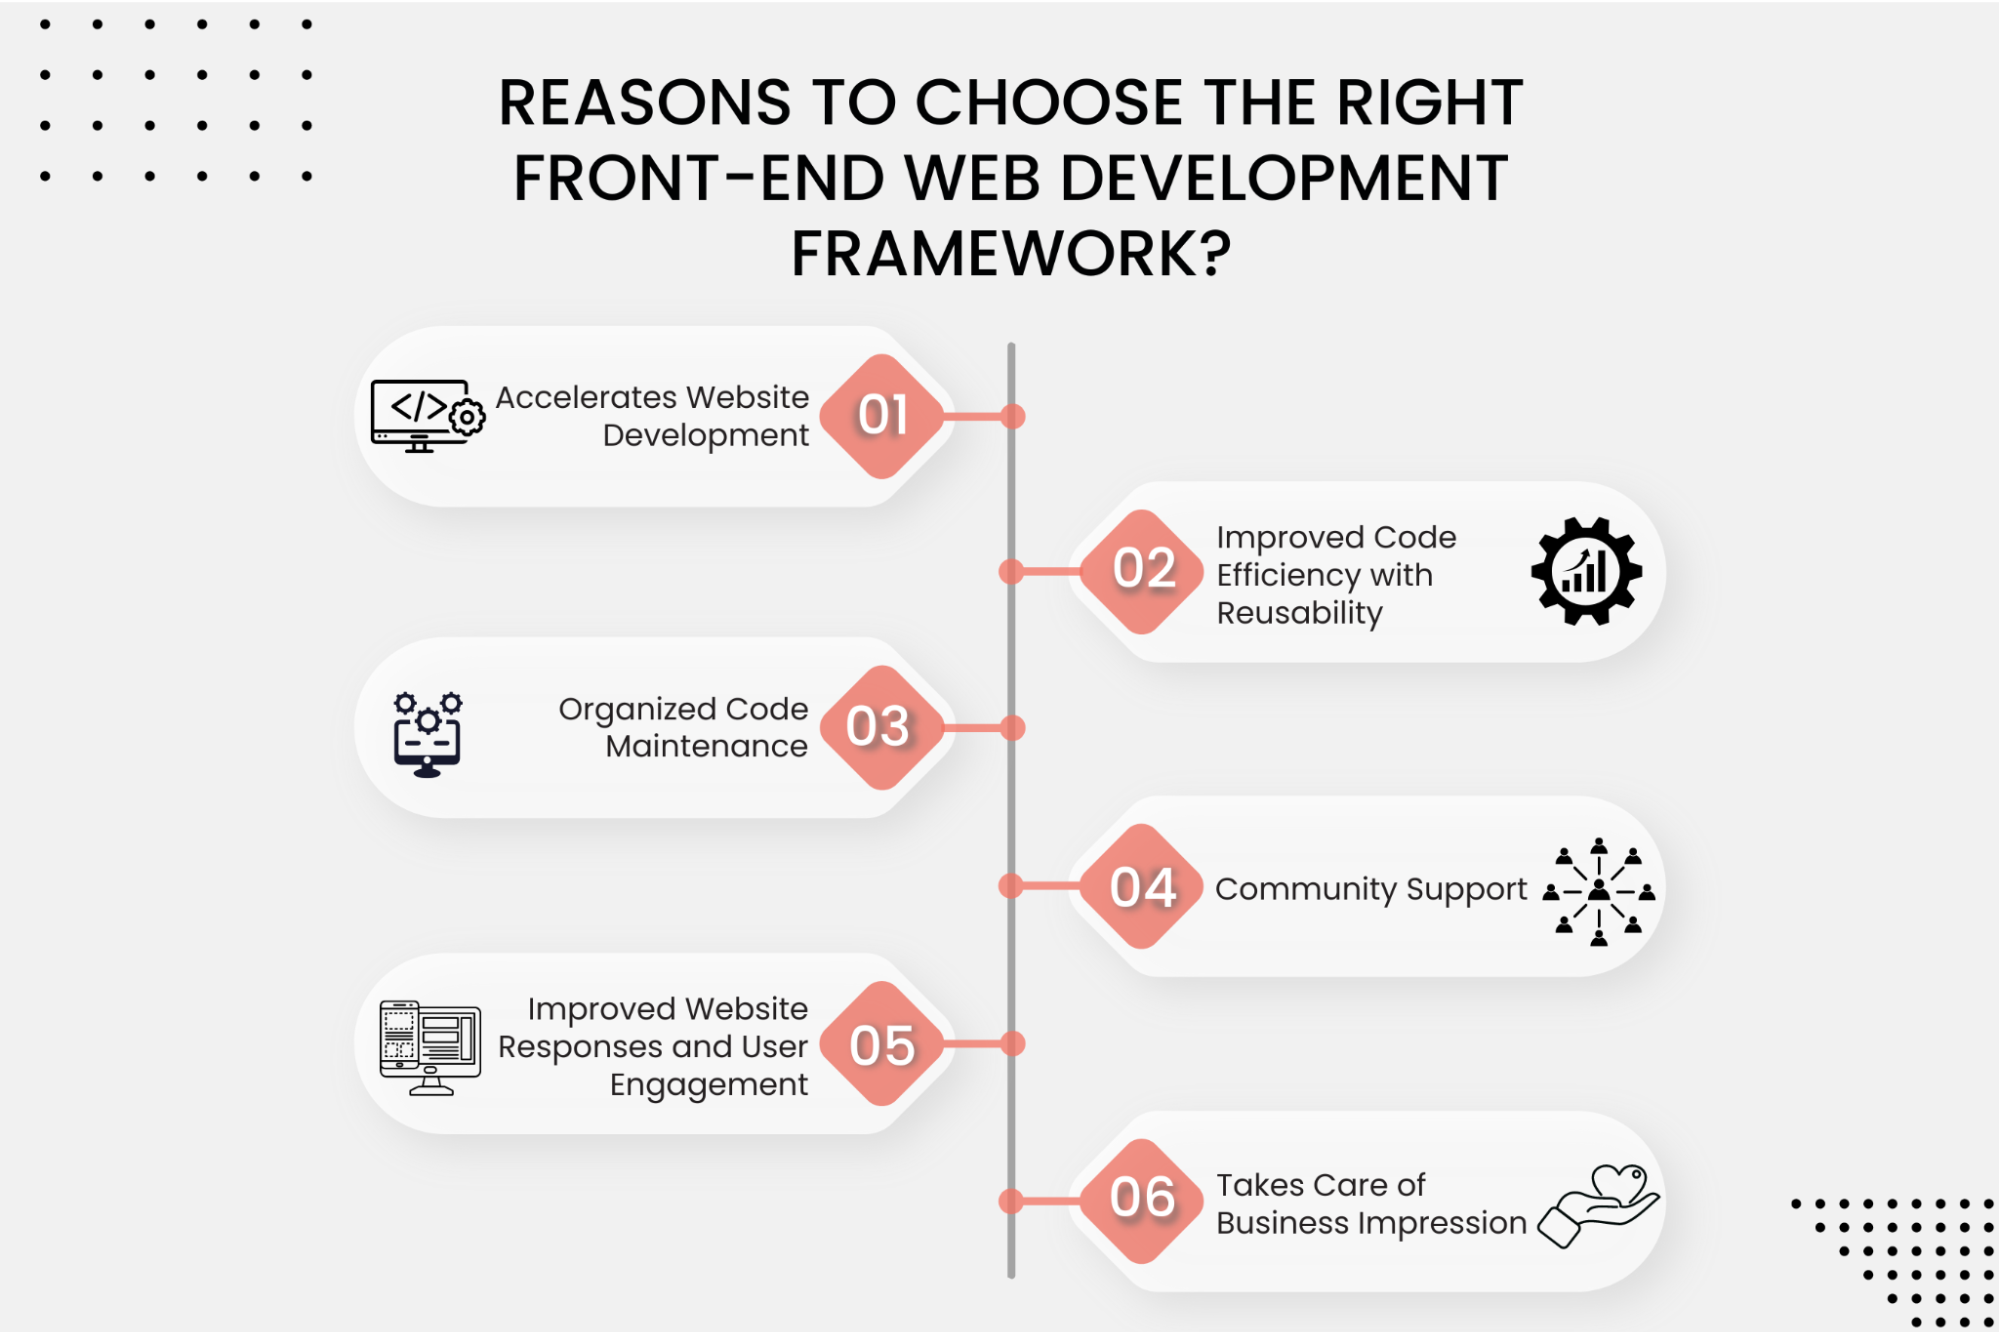 Why Is It Important to Choose The Right Front-End Web Development Framework